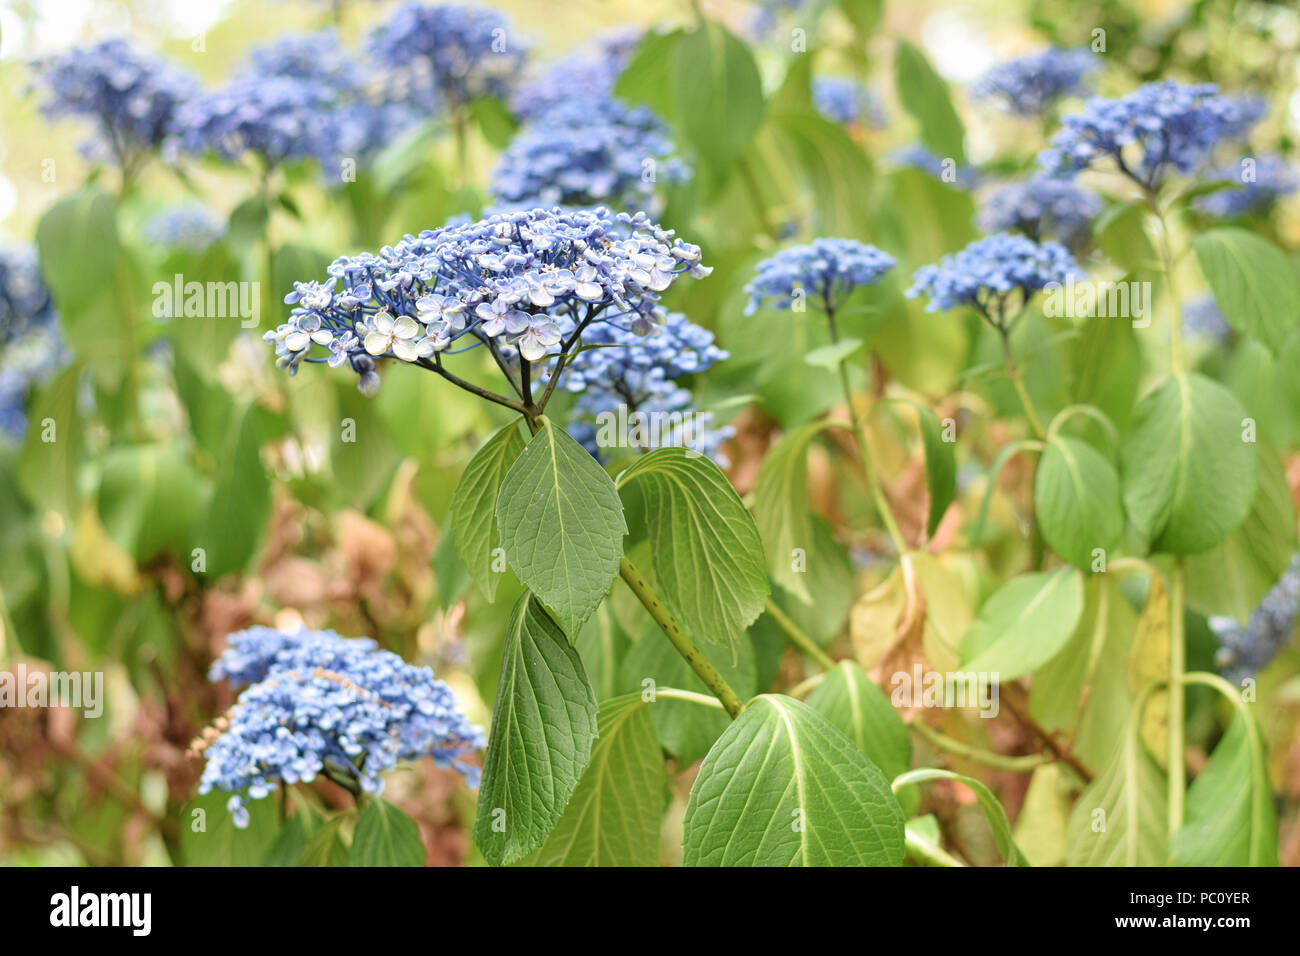 Hydrangea plant with wilting drooping leaves Stock Photo